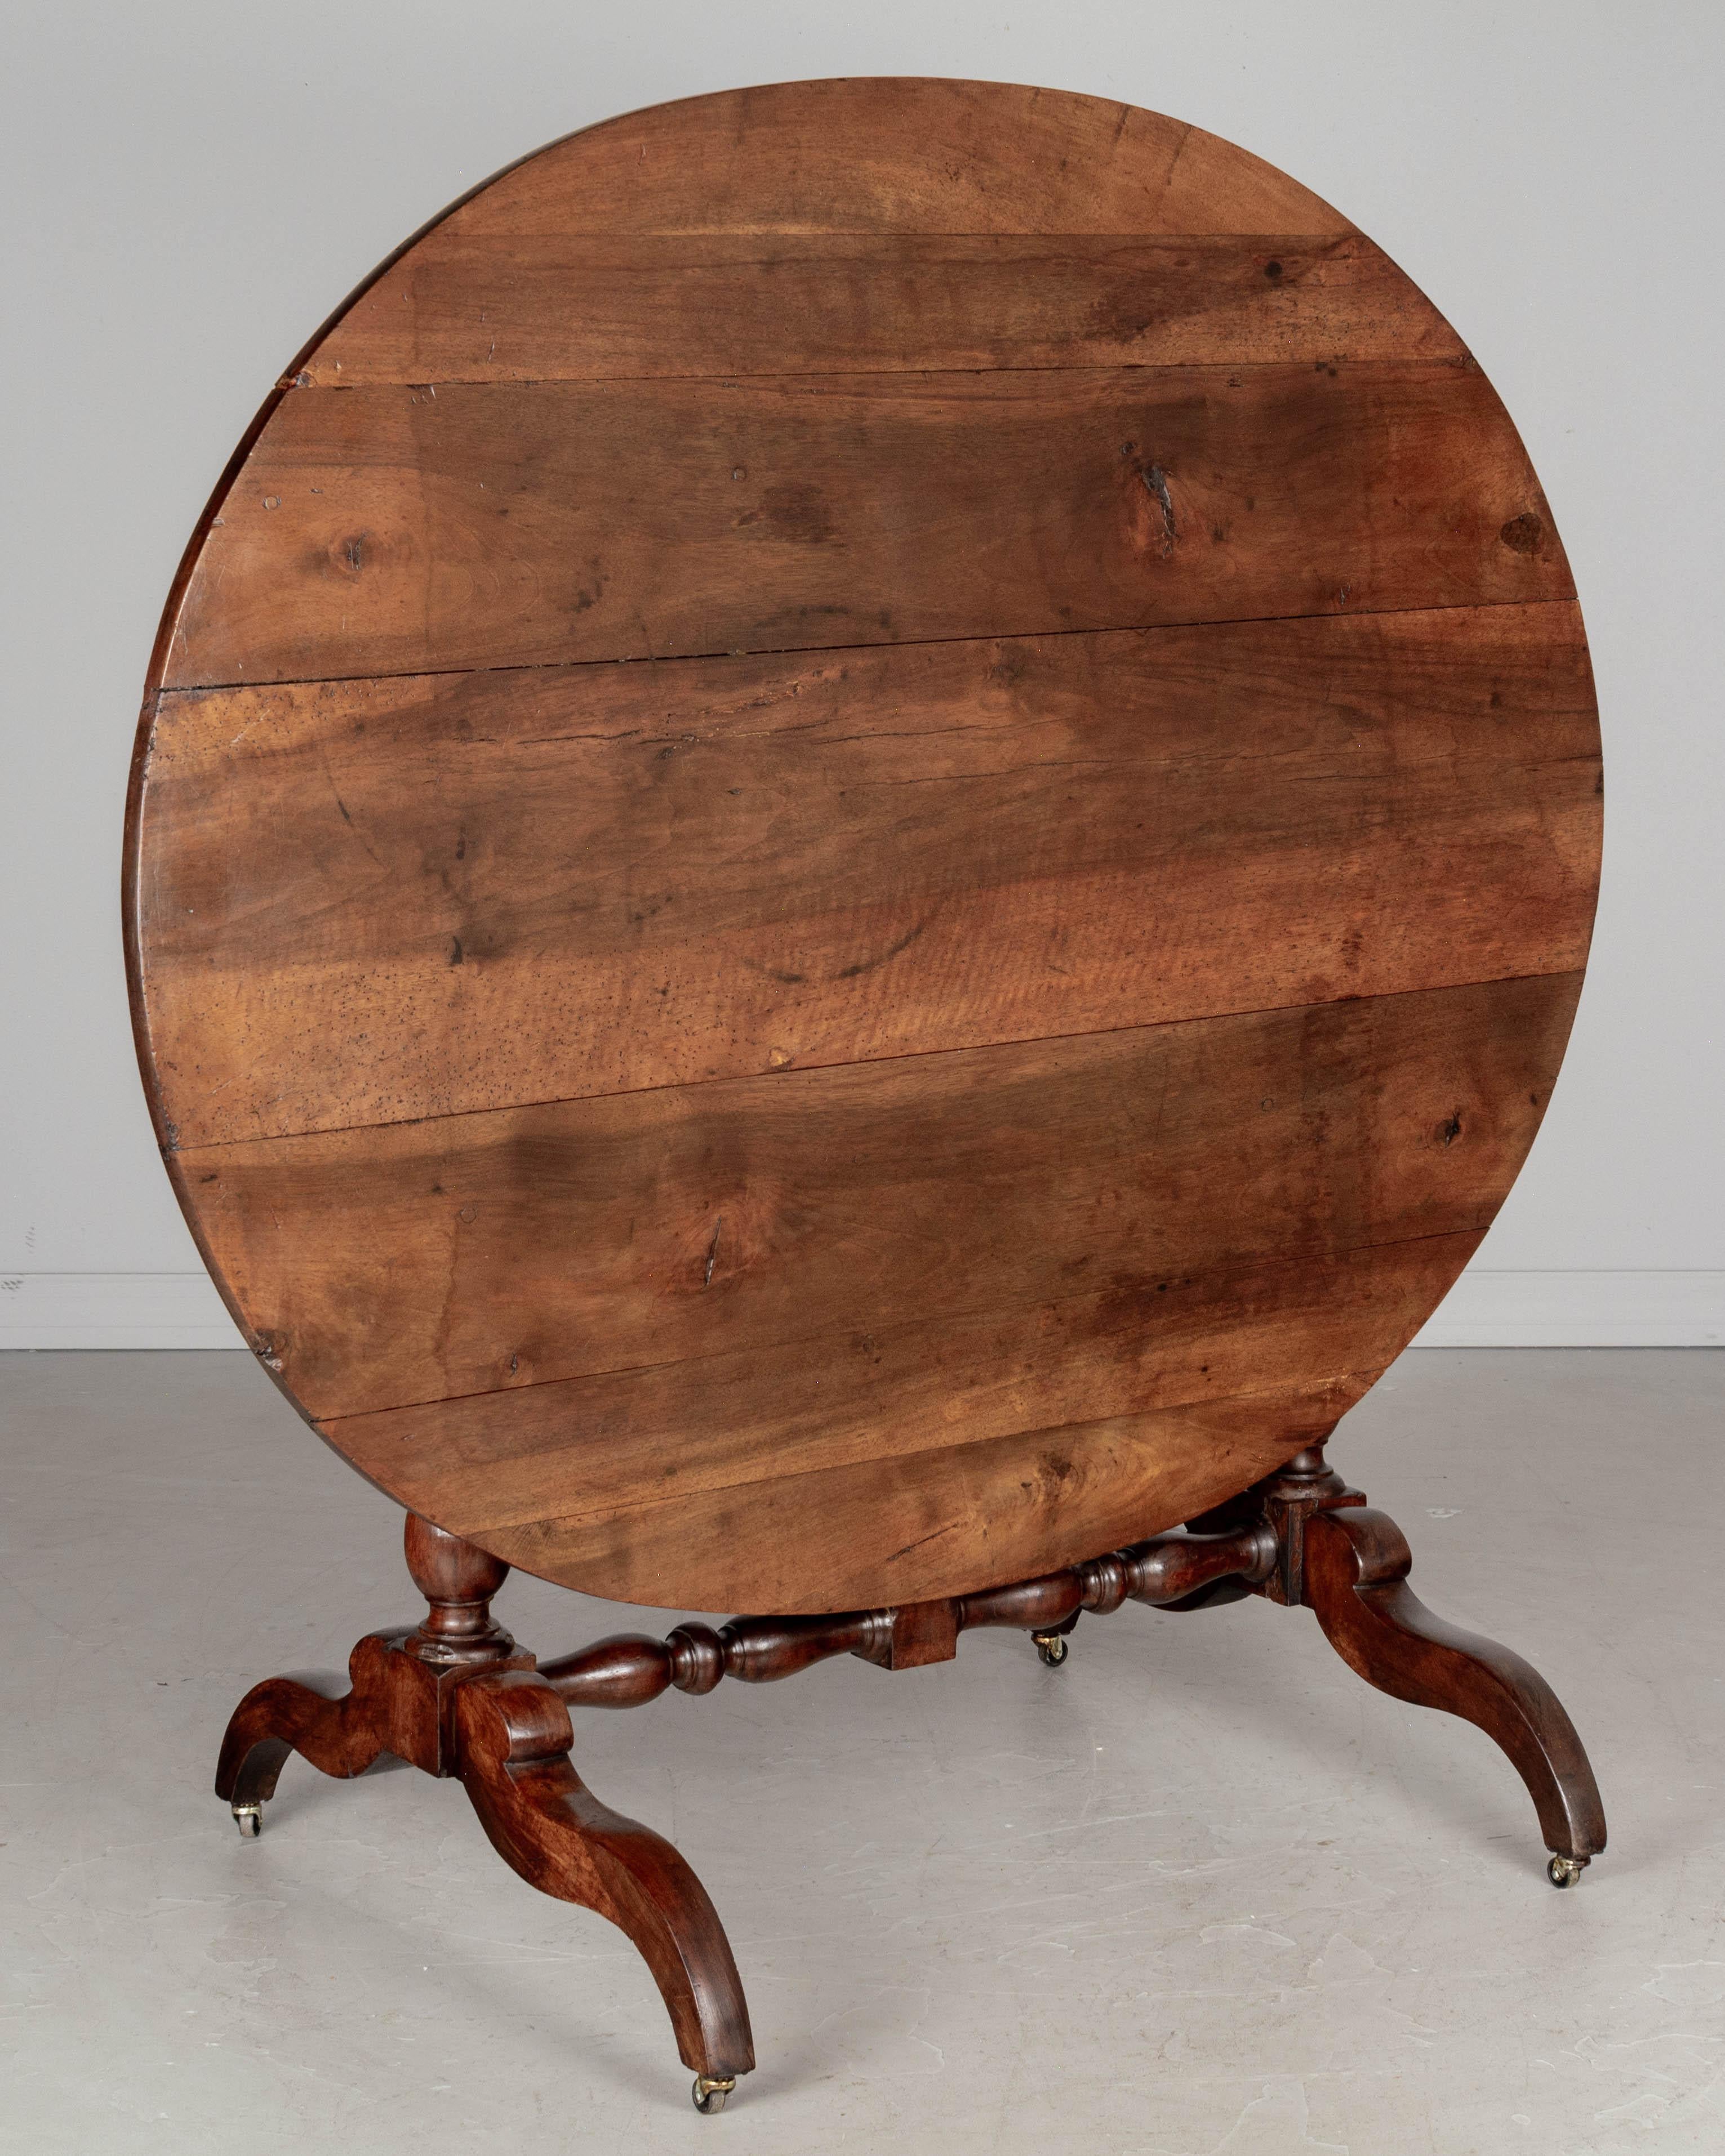 A 19th Century French Louis Philippe style oval wine tasting, or tilt-top table with turned legs and stretcher. Made of solid walnut with nice grain and character. Waxed finish. Wheels have been added and may be removed. Good restored condition.